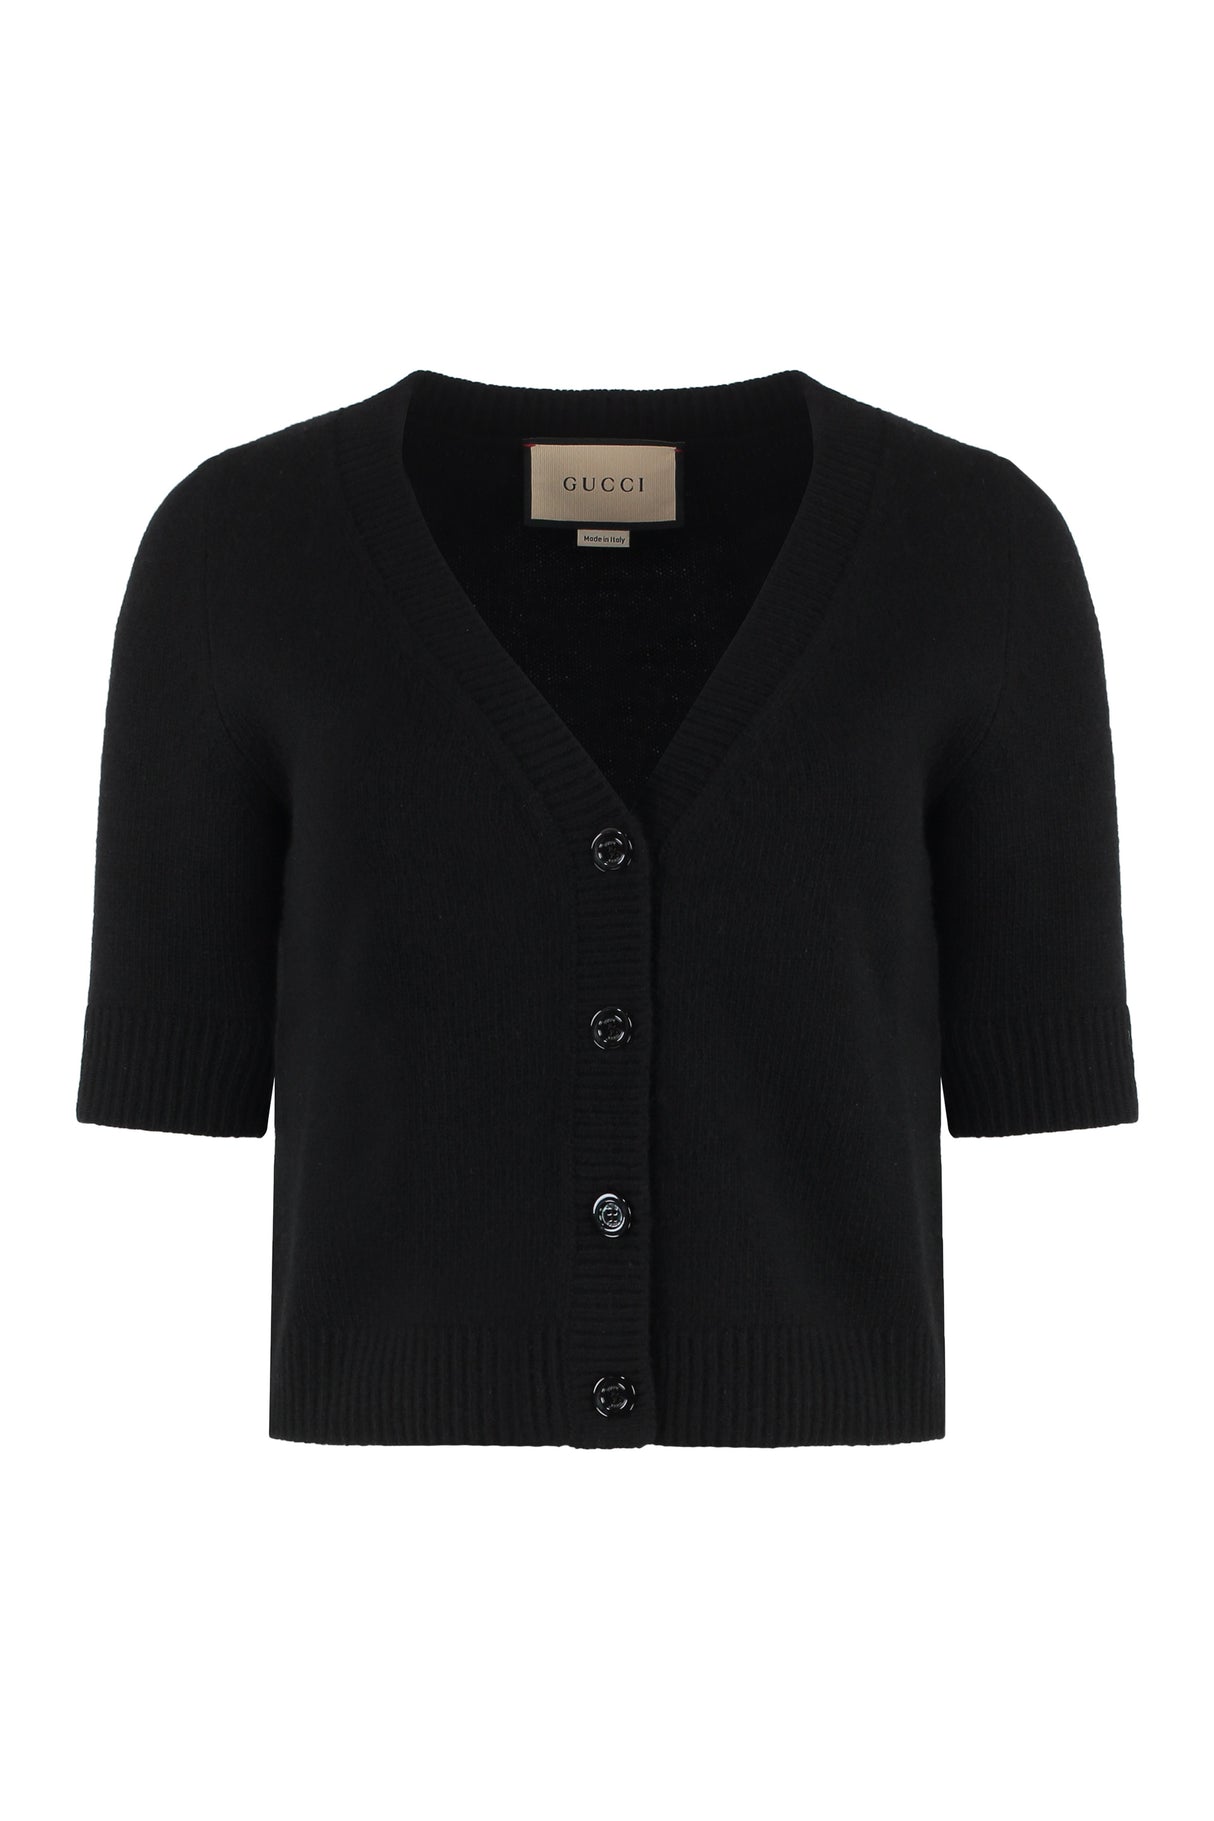 GUCCI Luxurious Black Wool and Cashmere Knit Cardigan for Women